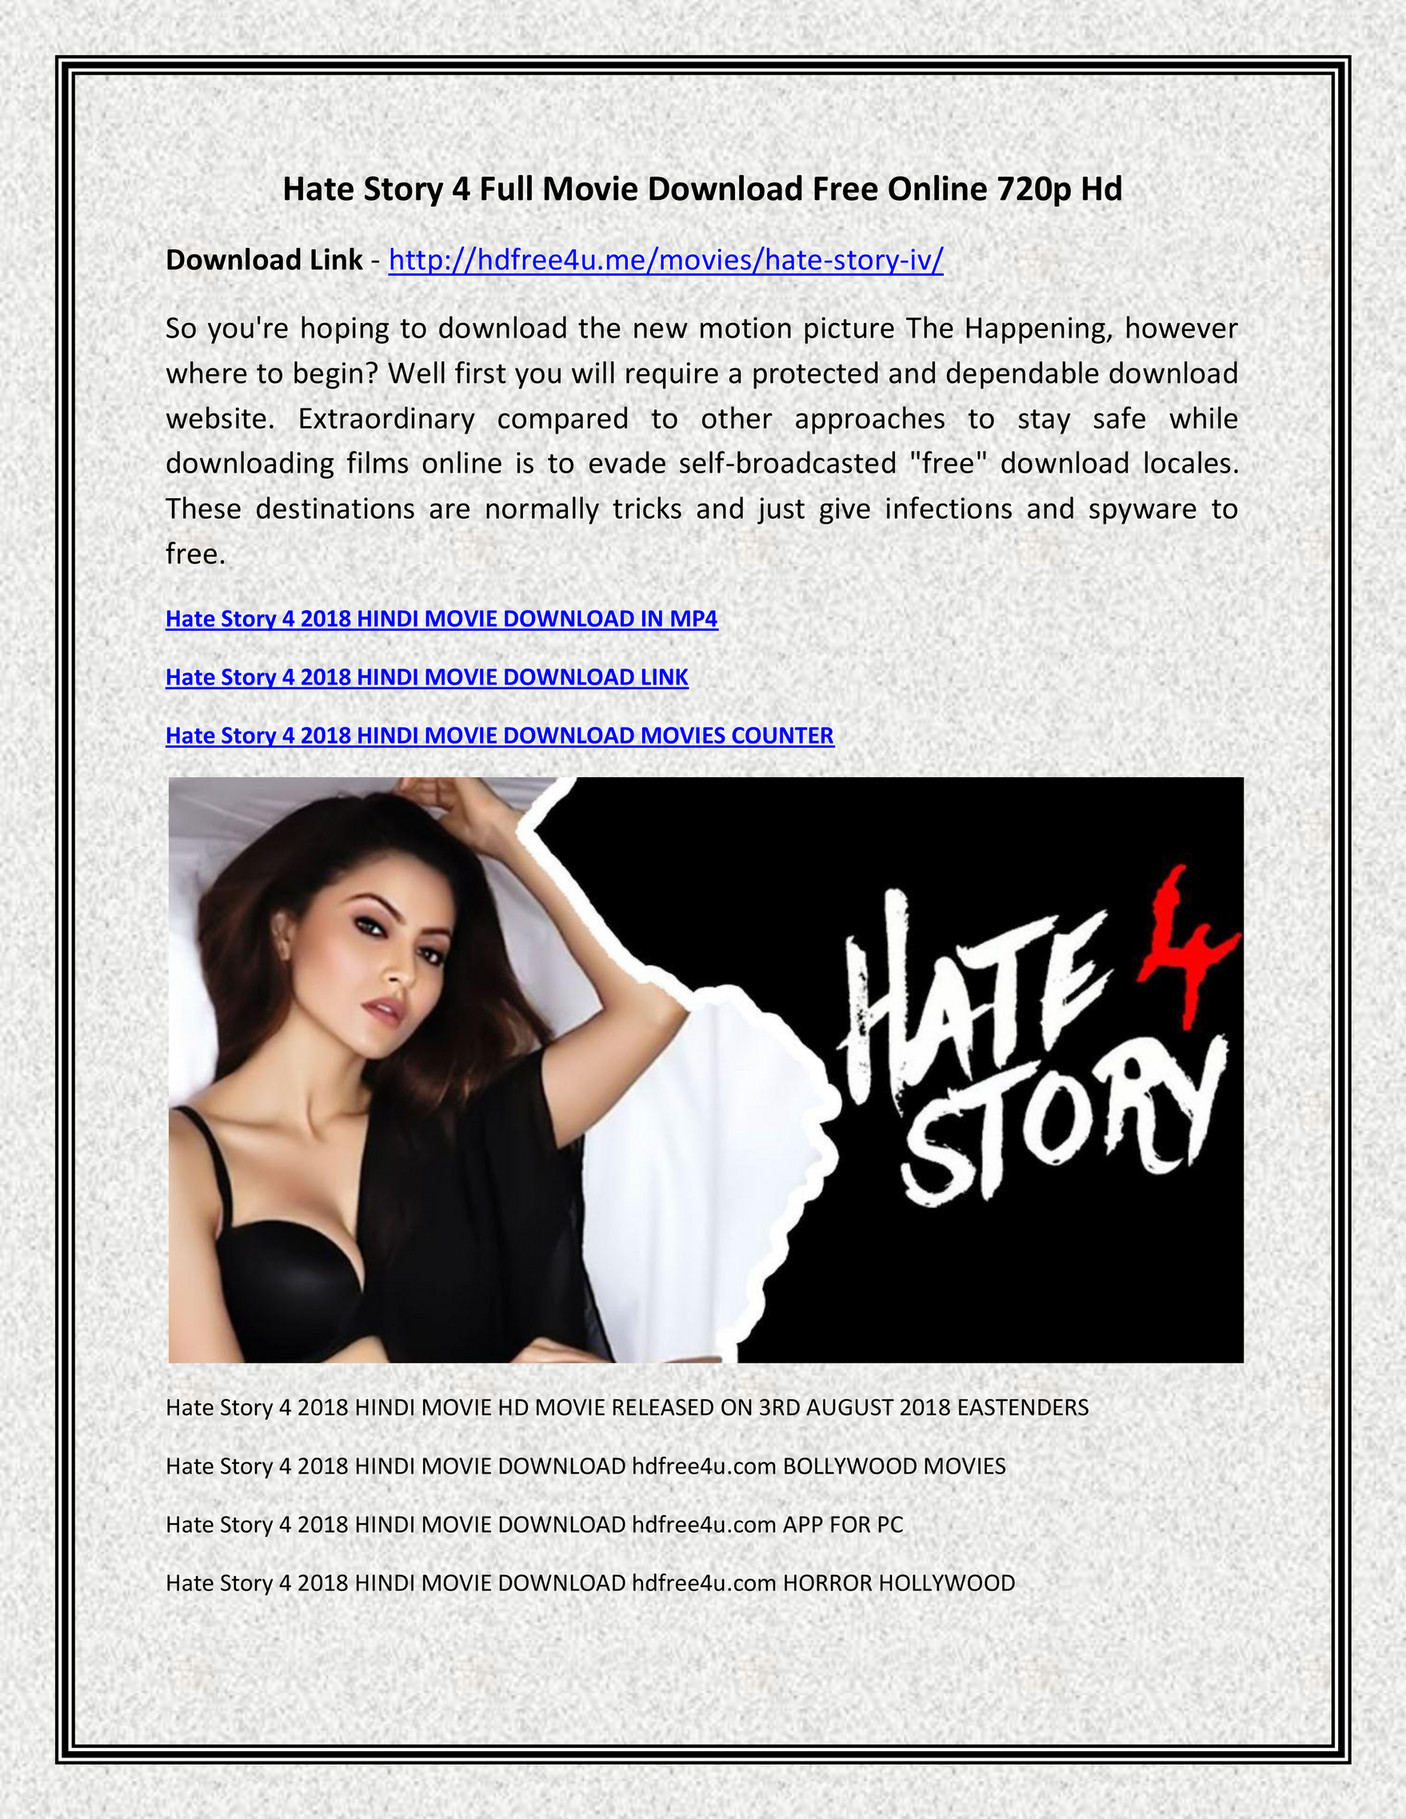 Hate story 2 full film download